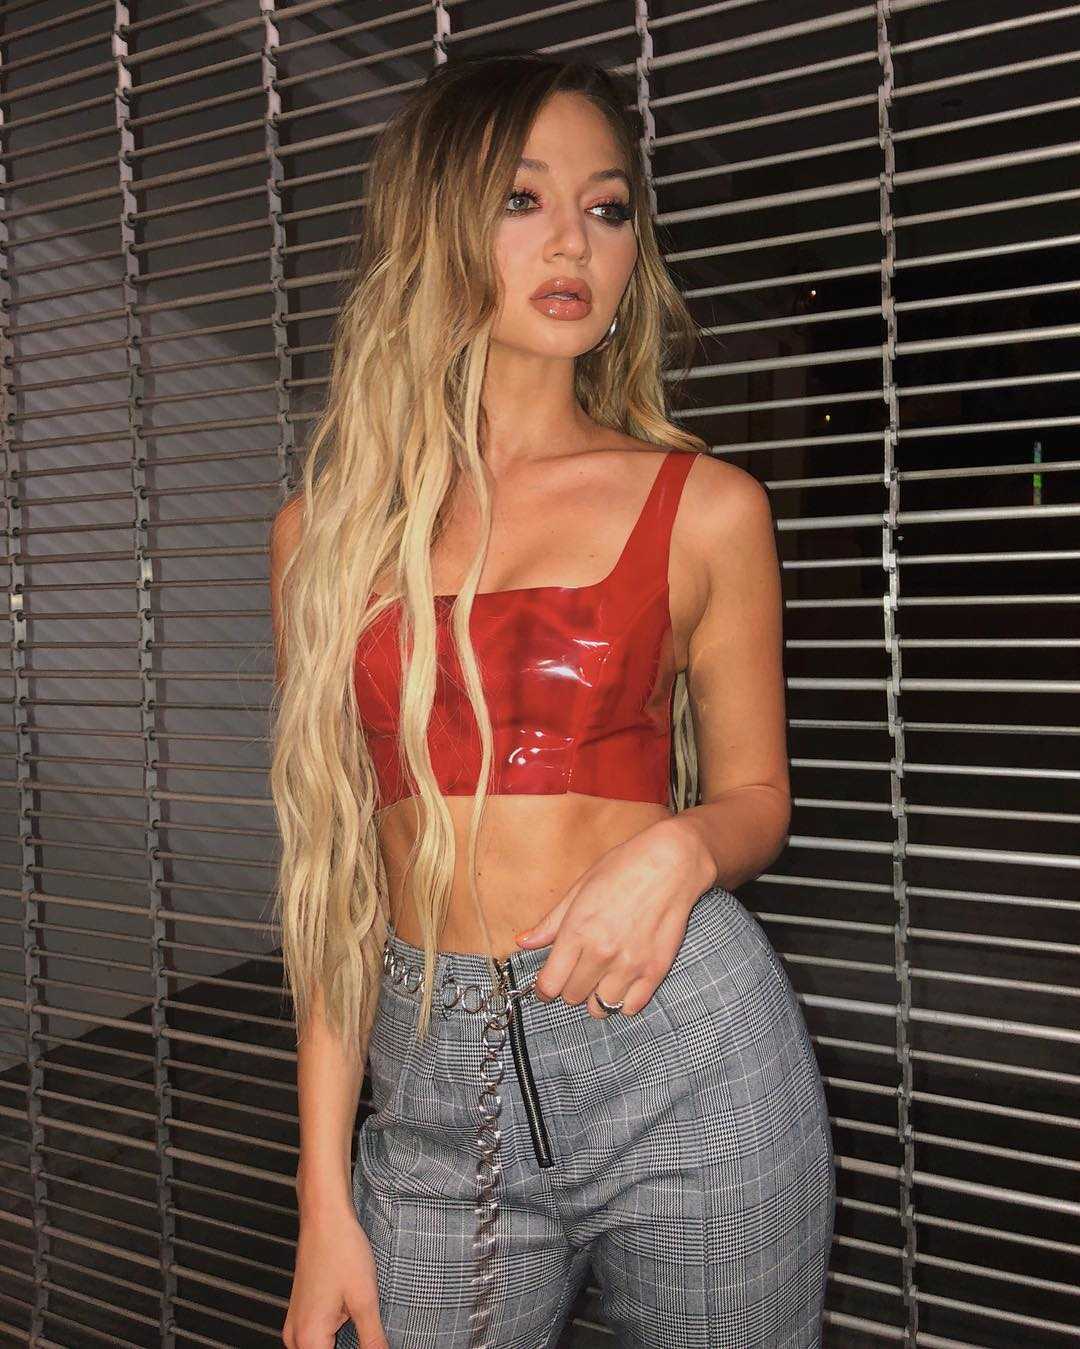 51 Hottest Erika Costell Big Butt Pictures That Will Make You Begin To Look All Starry Eyed At Her 20